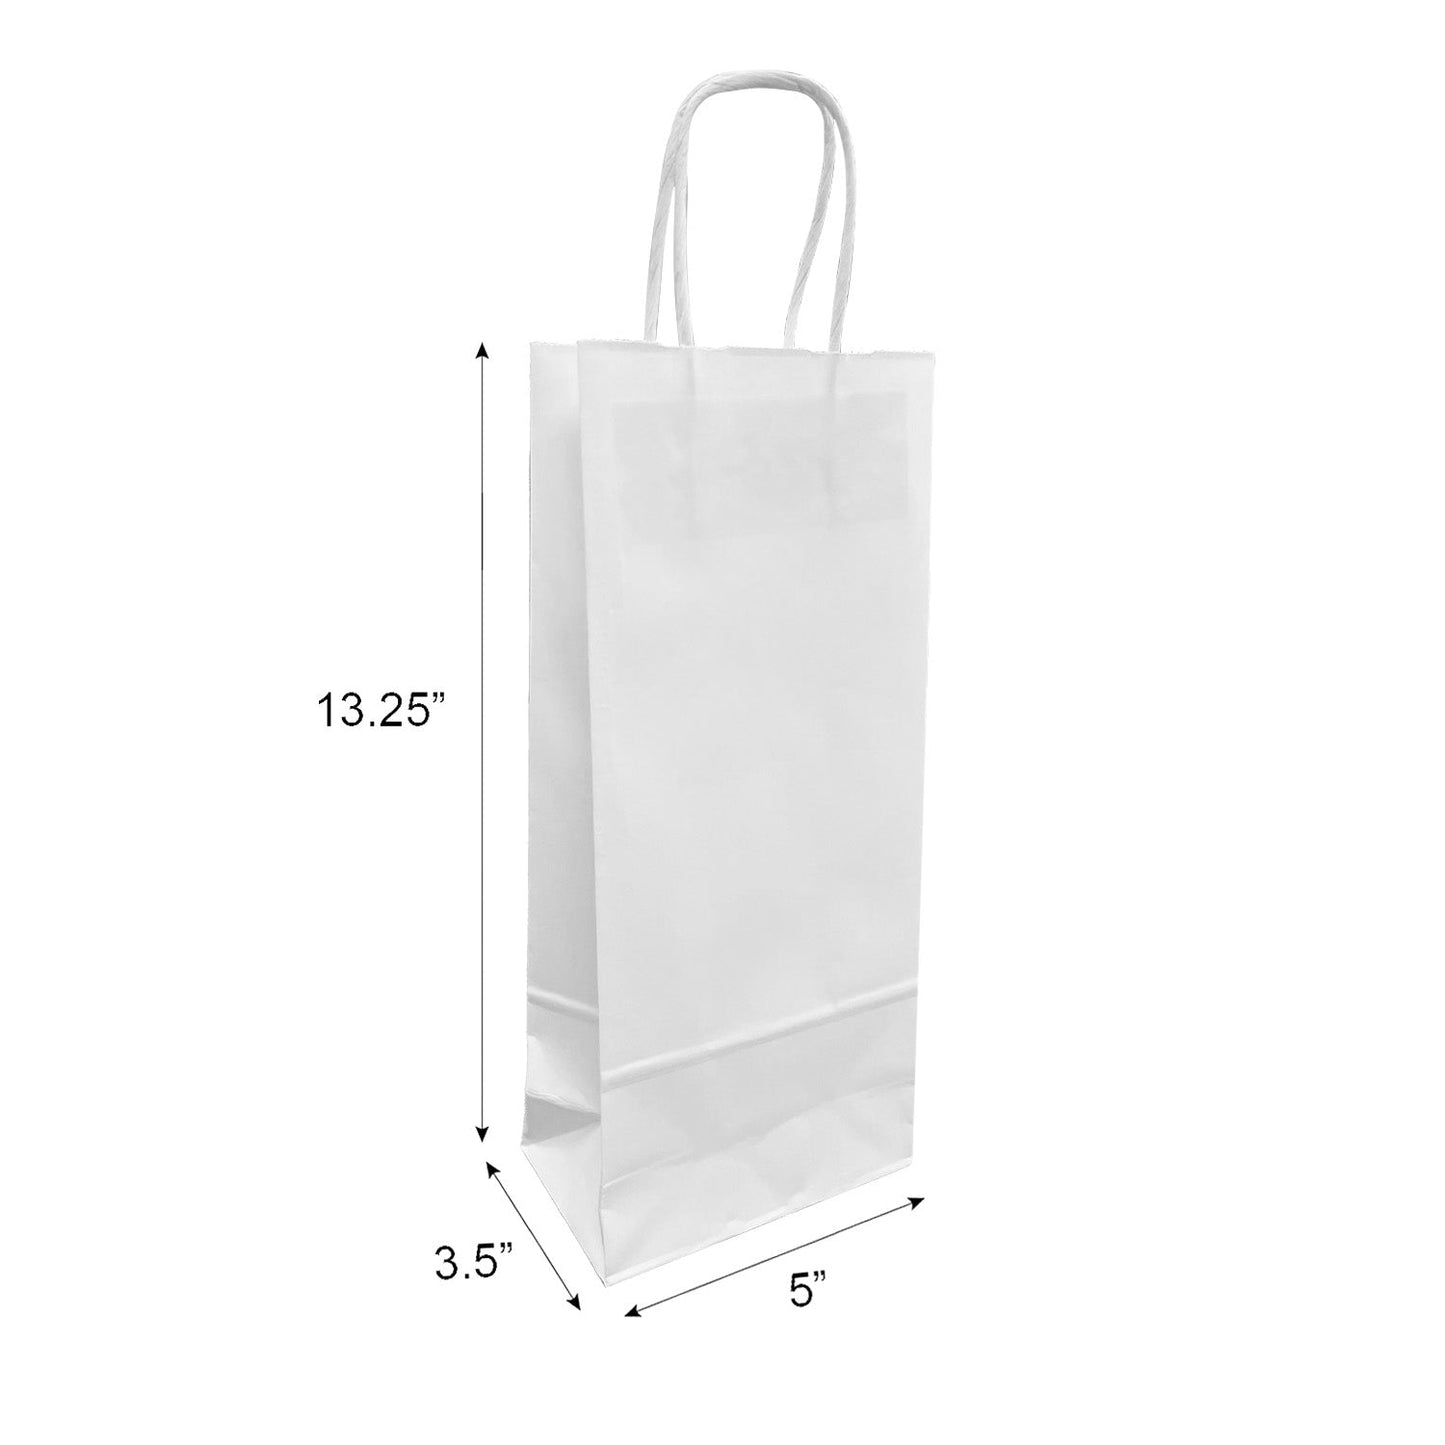 250 Pcs, Wine,  5.5x3.25x13 inches, White Paper Bags, with Twisted Handle